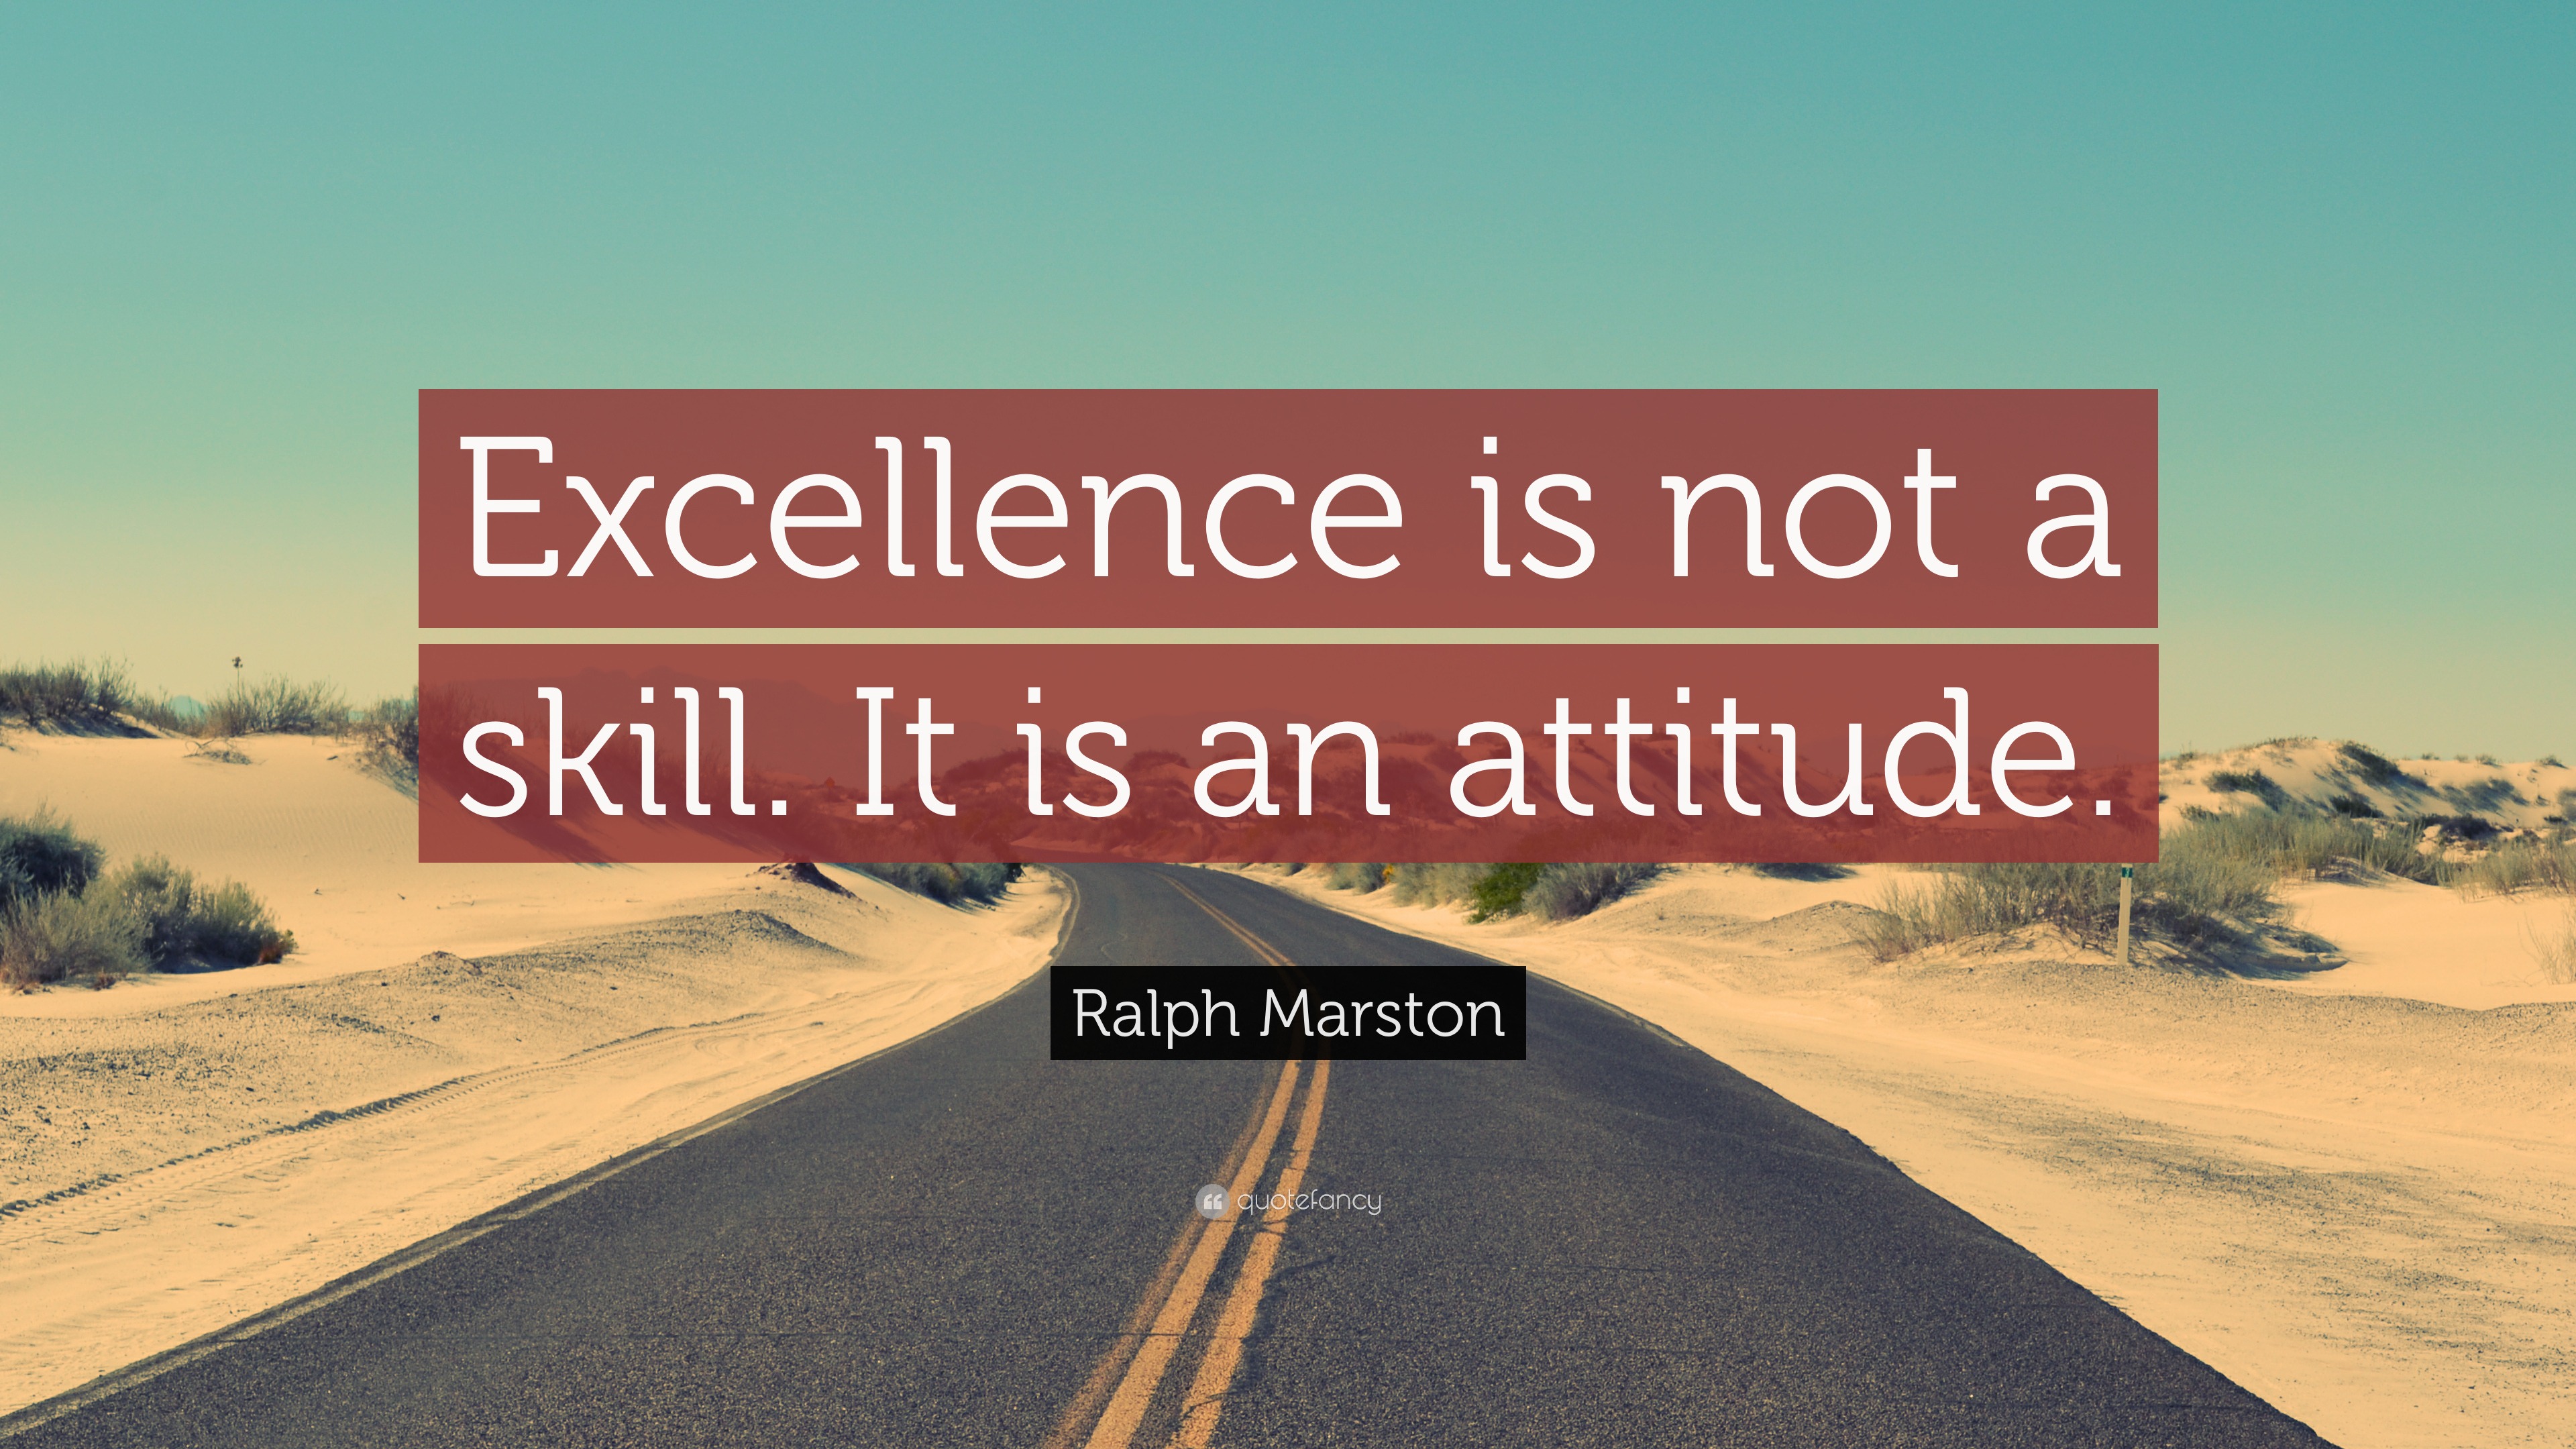 Ralph Marston Quote “excellence Is Not A Skill It Is An Attitude” 